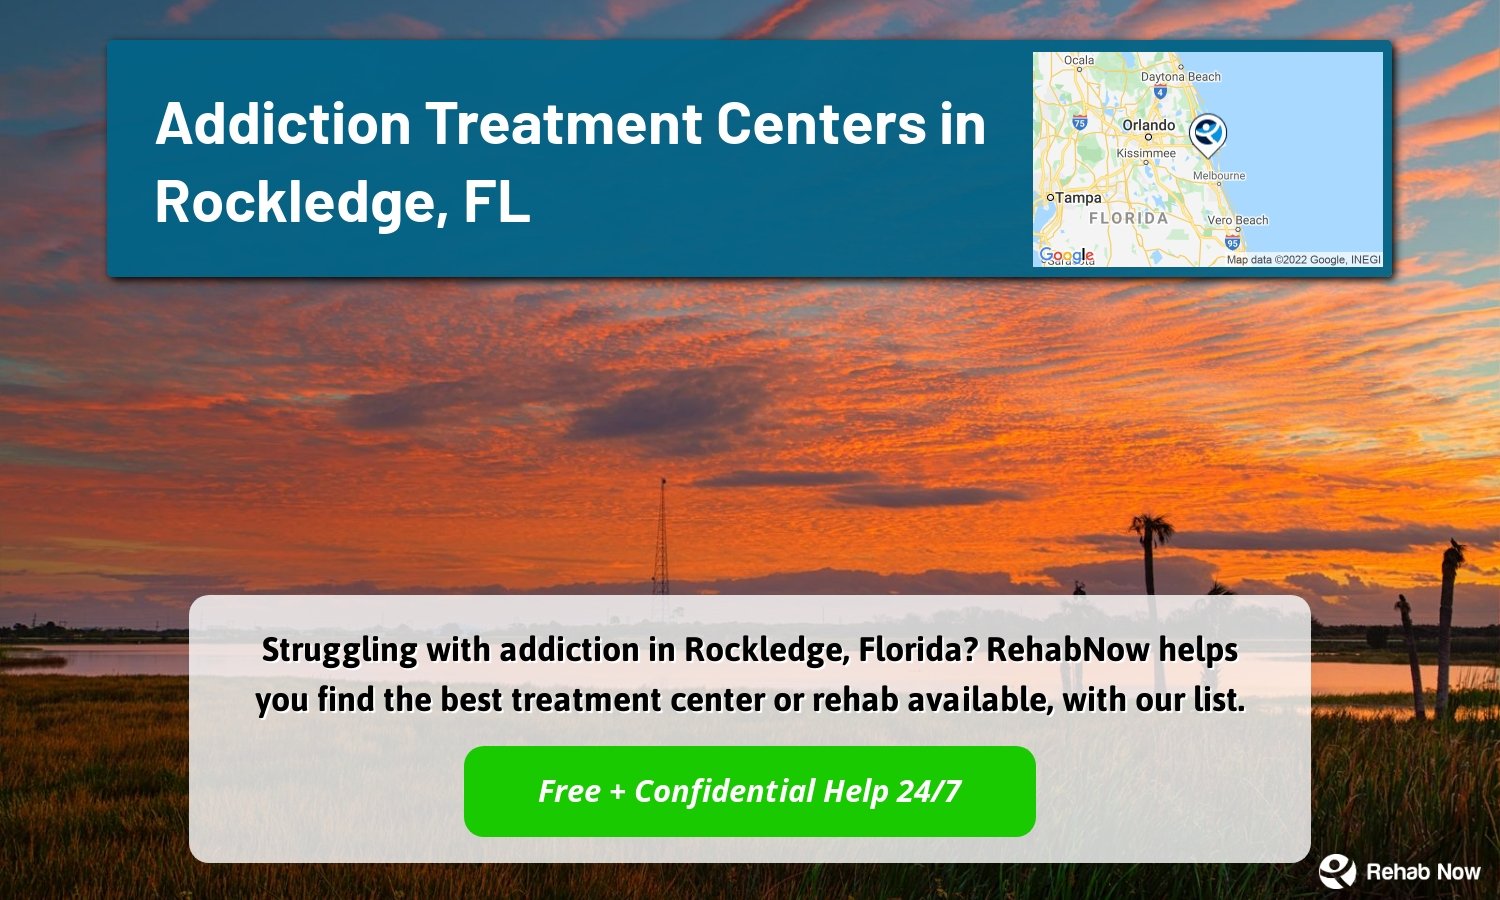 Struggling with addiction in Rockledge, Florida? RehabNow helps you find the best treatment center or rehab available, with our list.